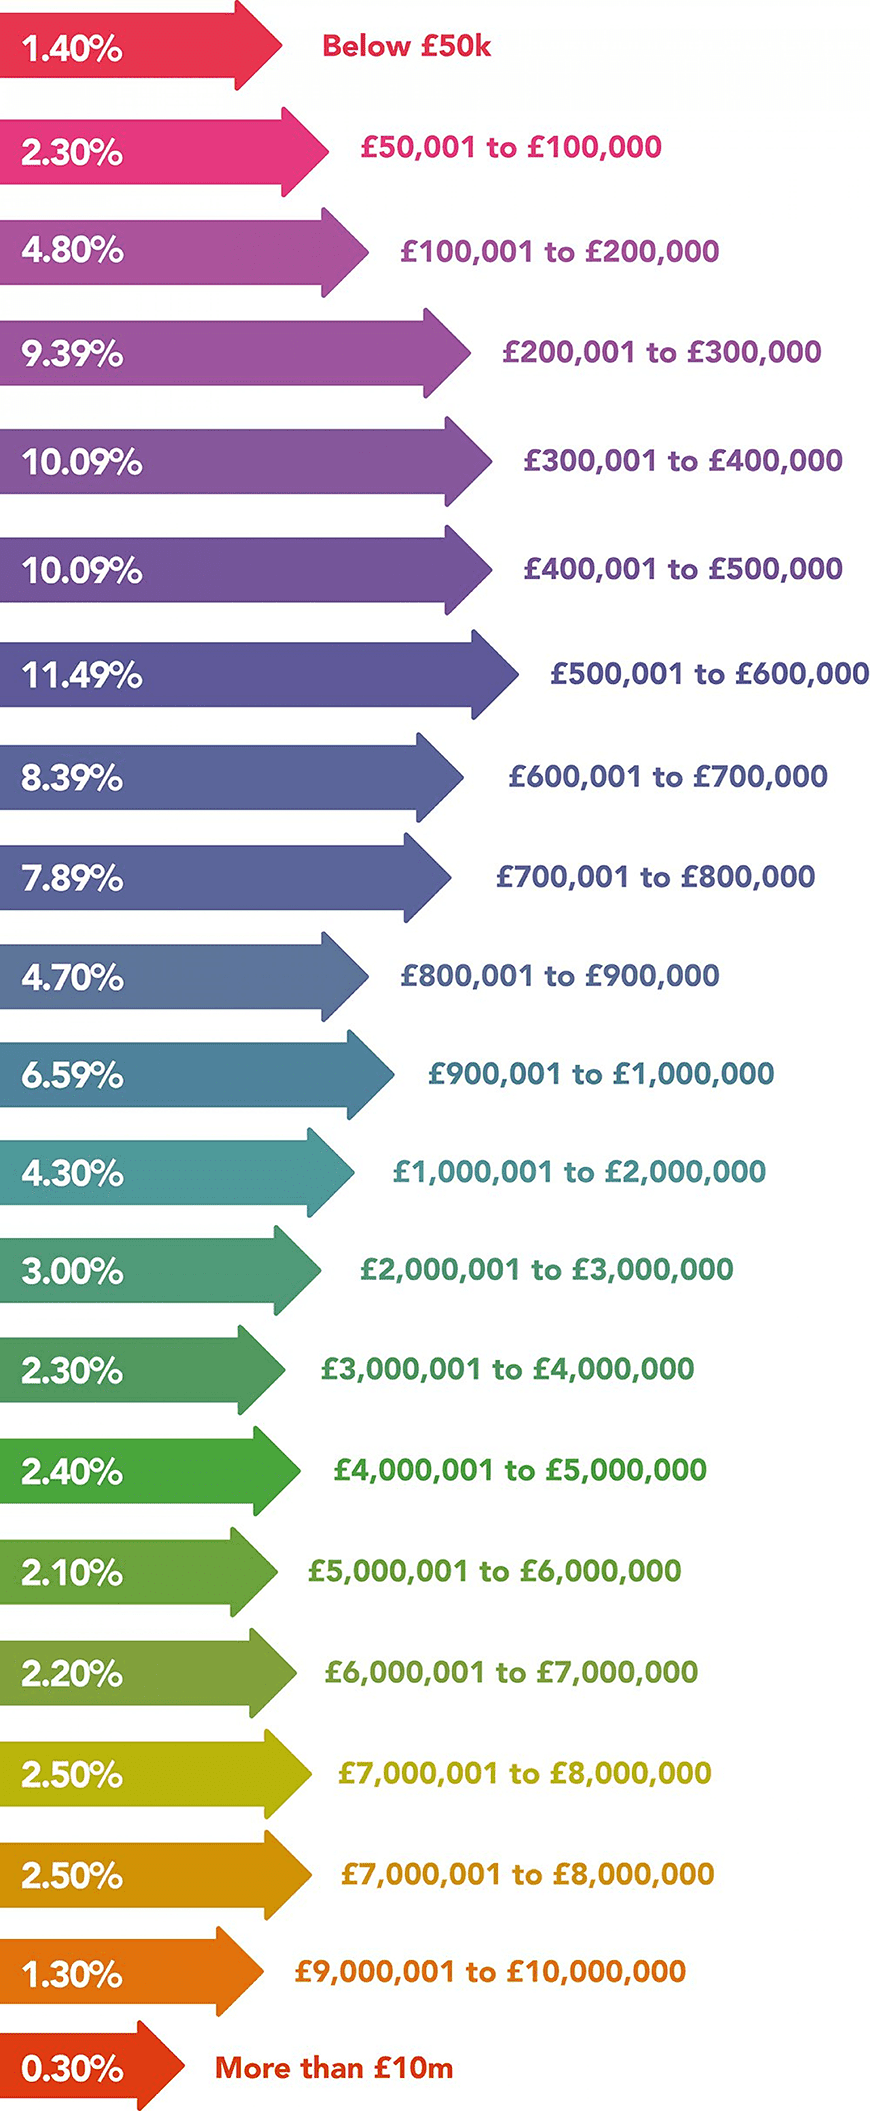 Multicoloured chart displaying poll results of 1001 people and how much they needed to raise the last time they used bridging finance. The most popular response was Â£500,000 to Â£600,000 (11.49% of respondents).